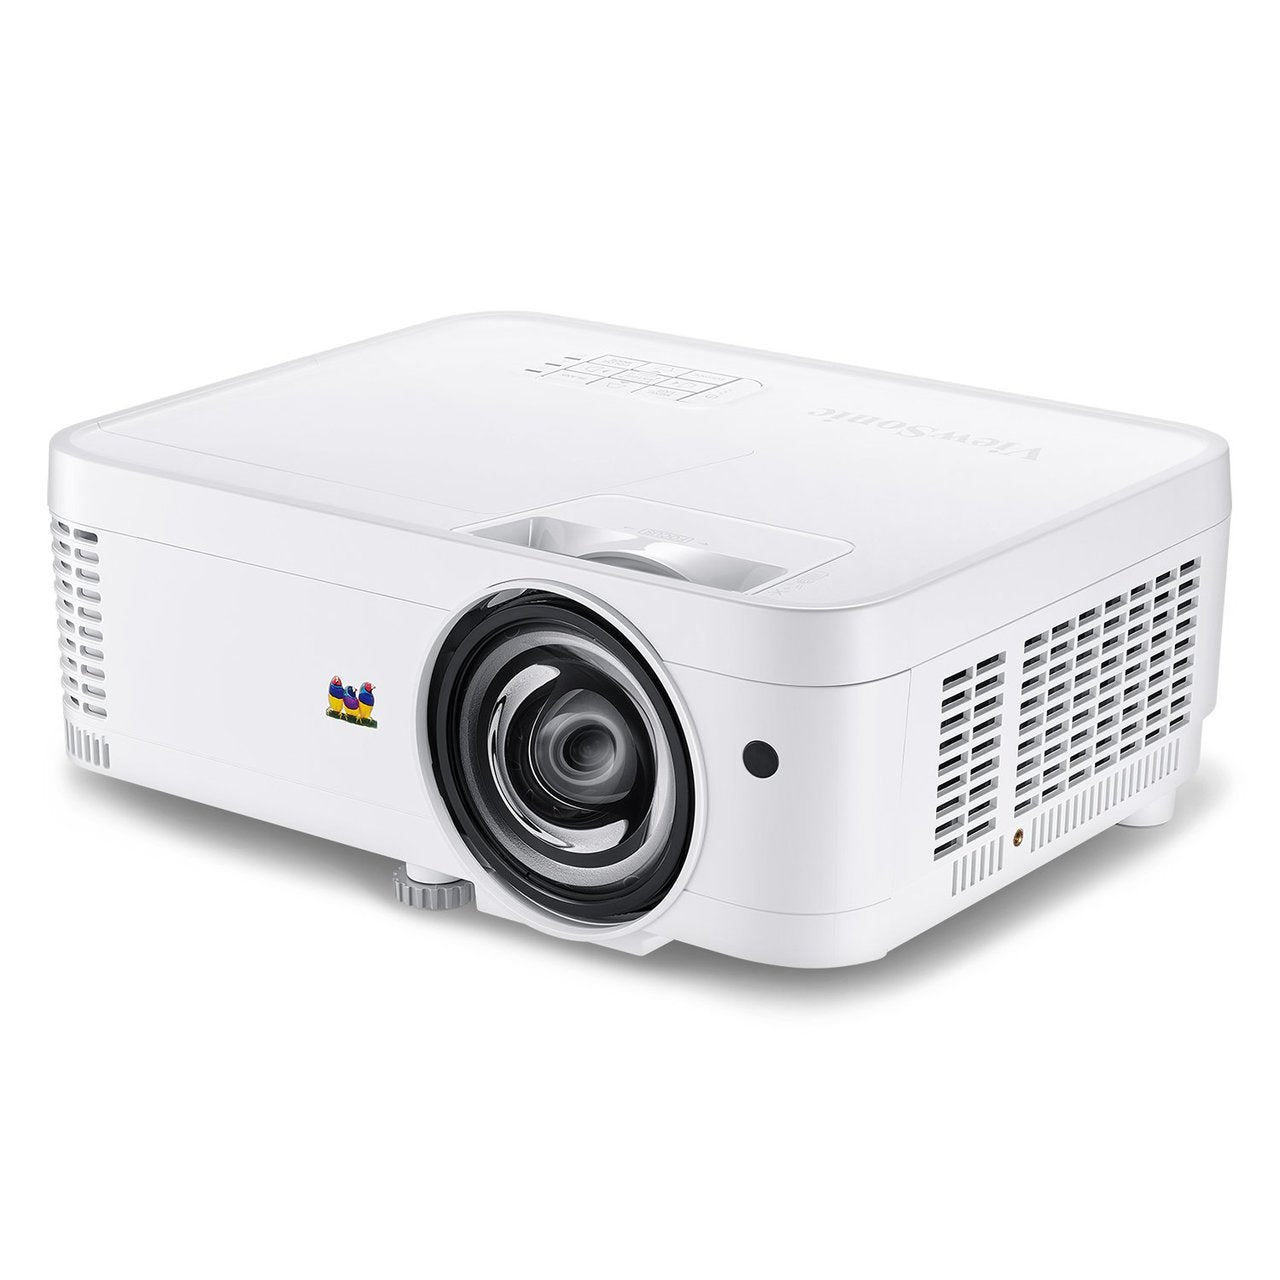 ViewSonic PS600W-R HDMI Networkable Short Throw Projector - Certified Refurbished